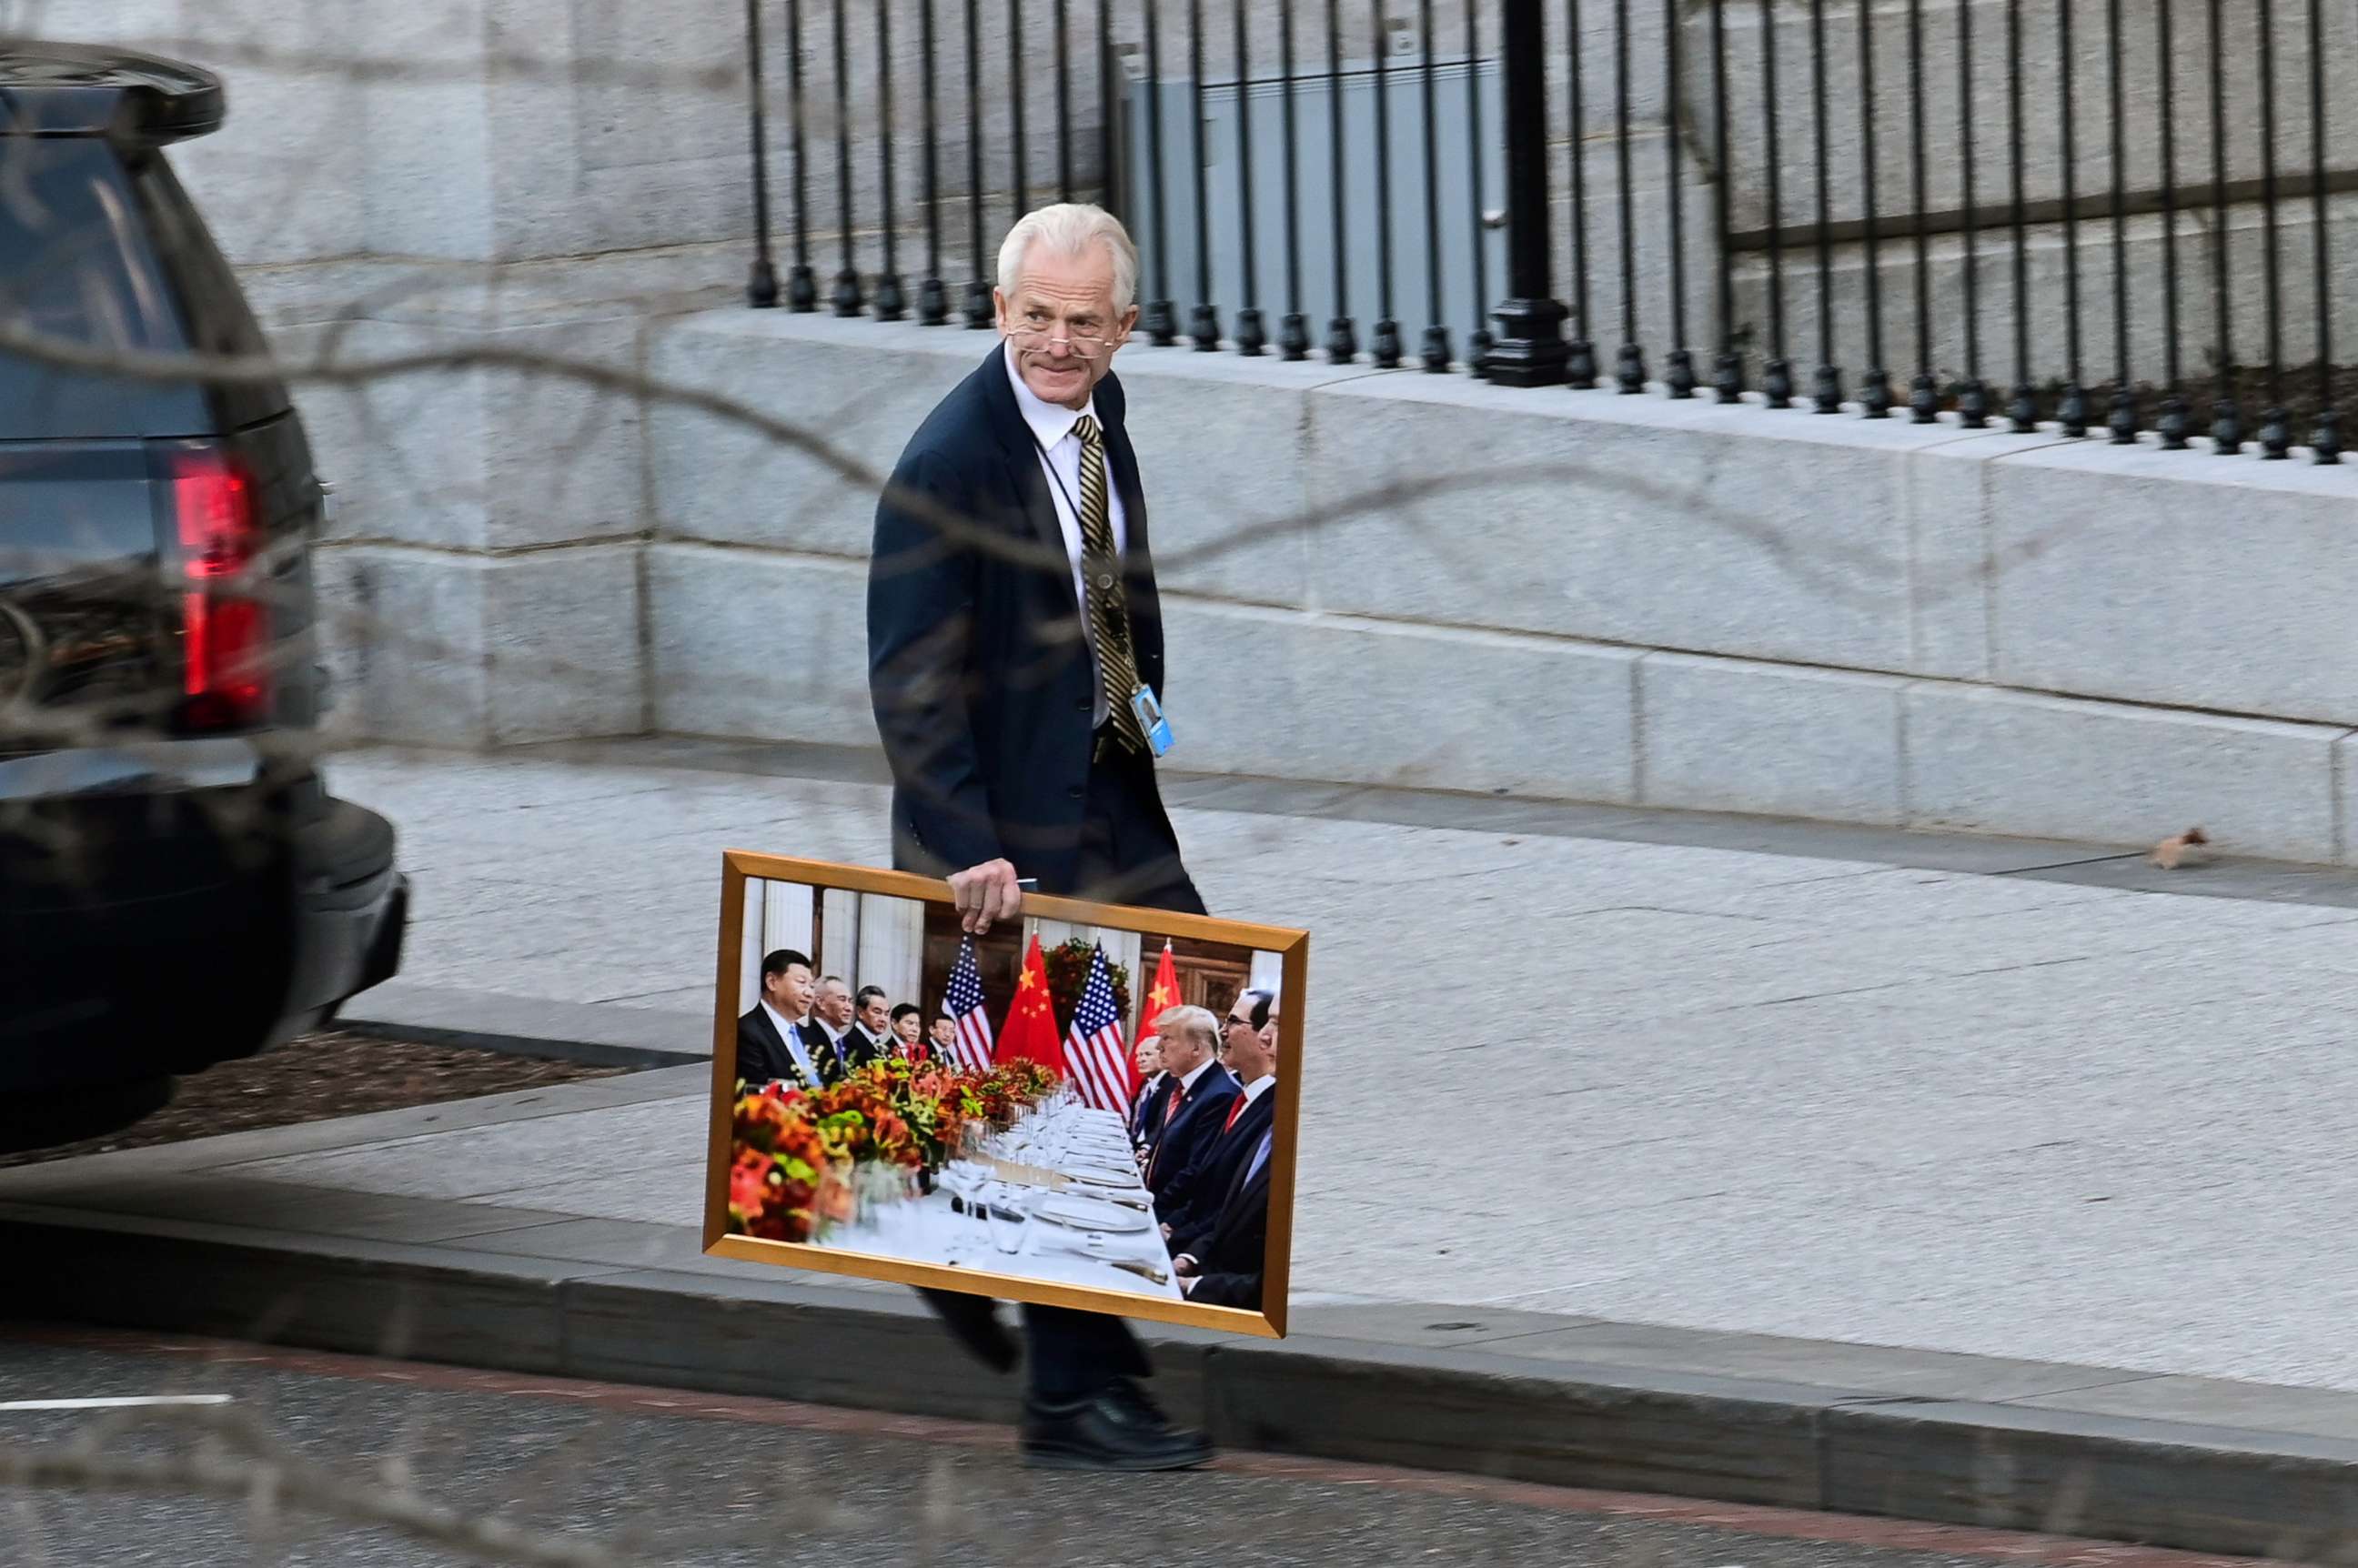 PHOTO: White House advisor Peter Navarro leaves the West Wing of the White House with a photograph of President Donald Trump and Chinese President Xi Jinping in Washington, D.C. on Jan. 13, 2021.